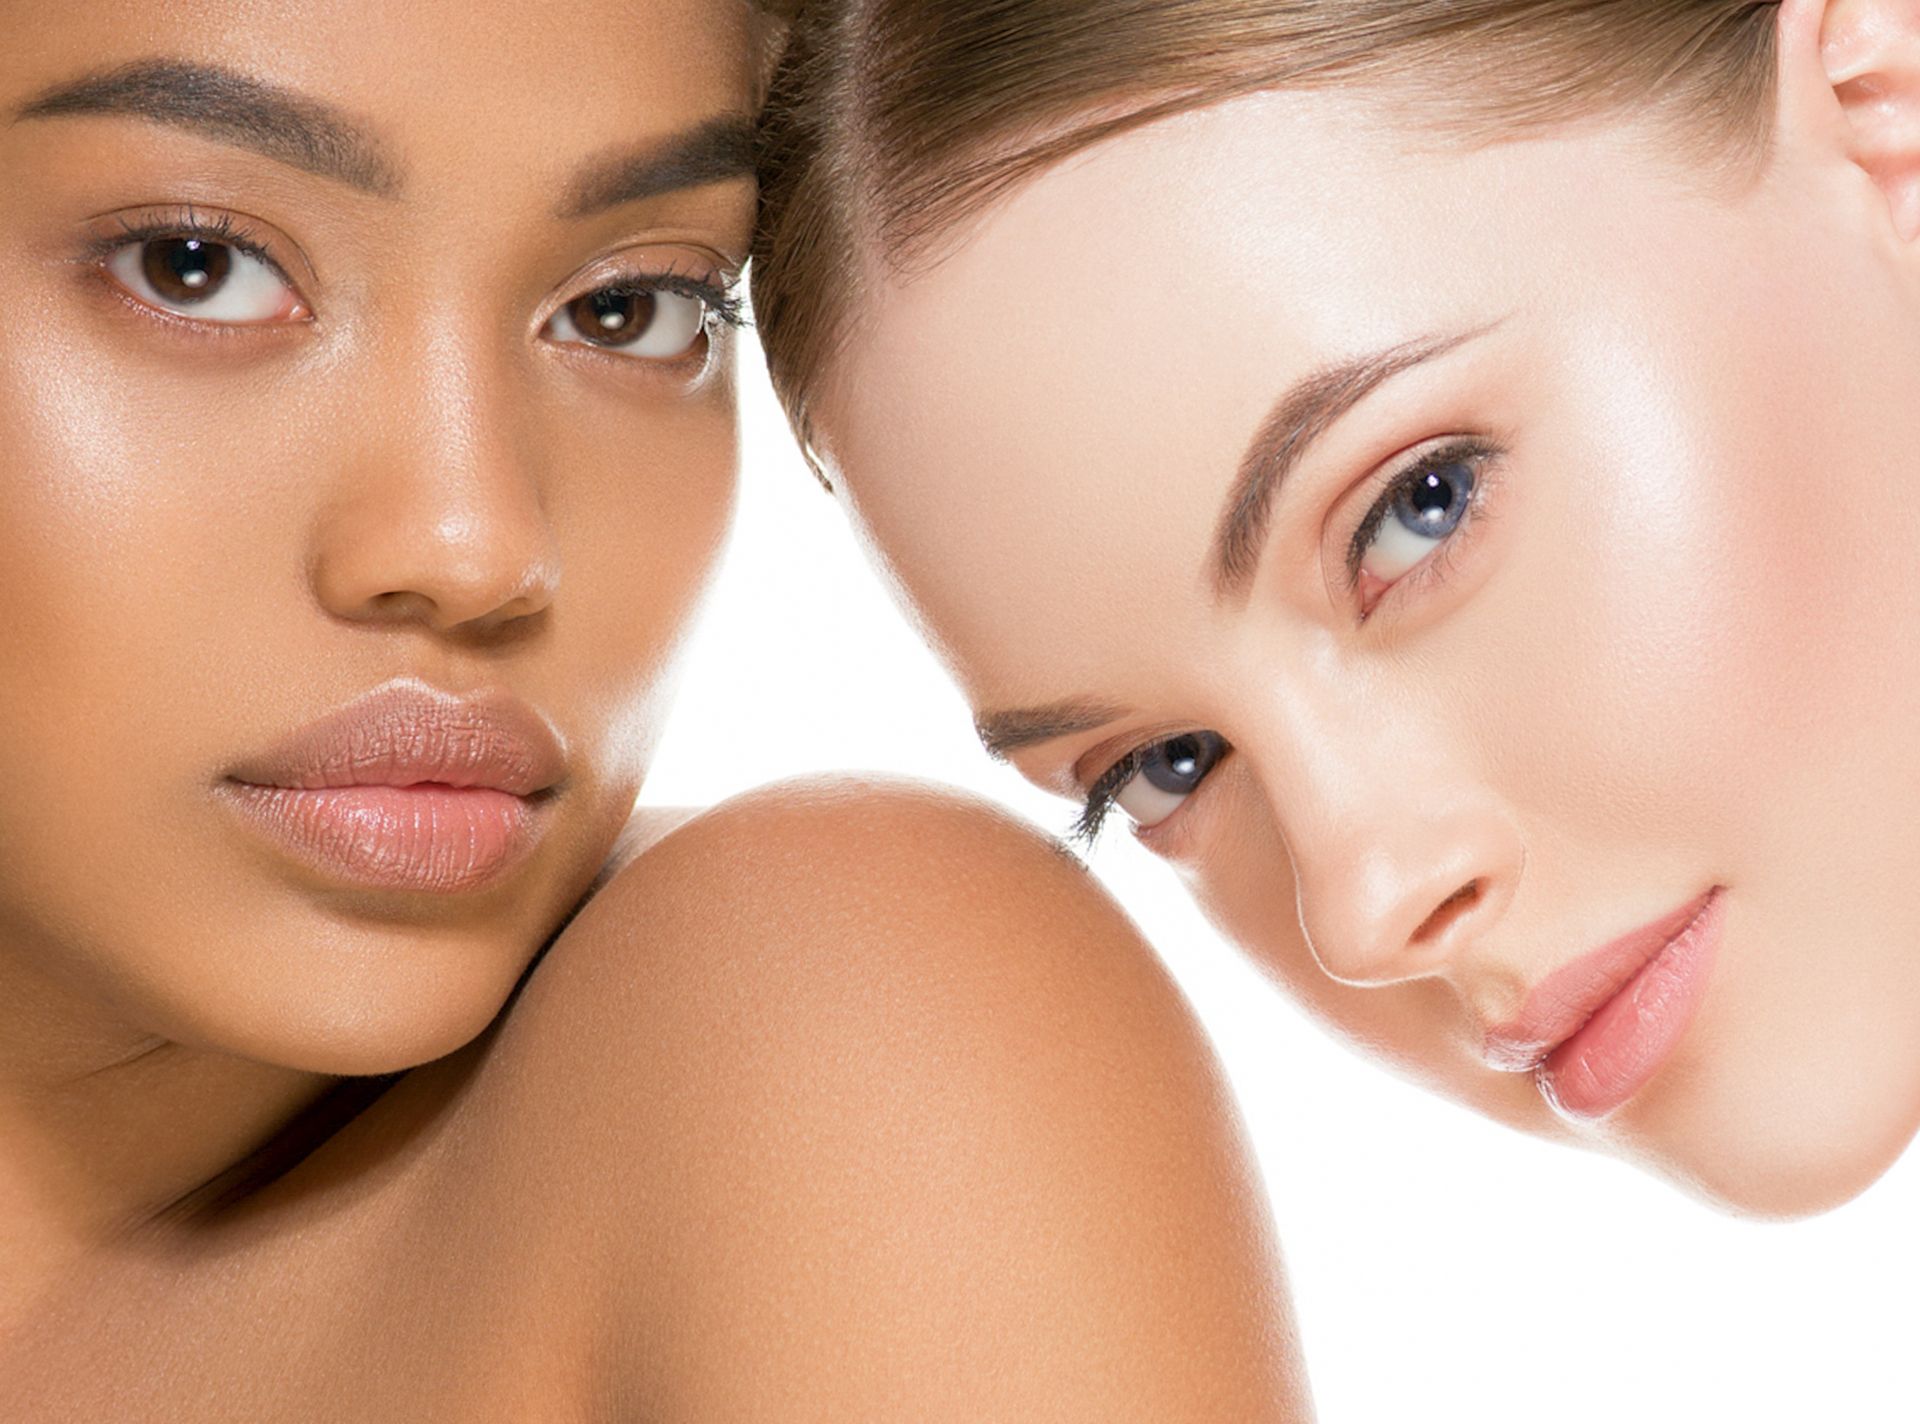 Two women with different skin tones are looking at each other.